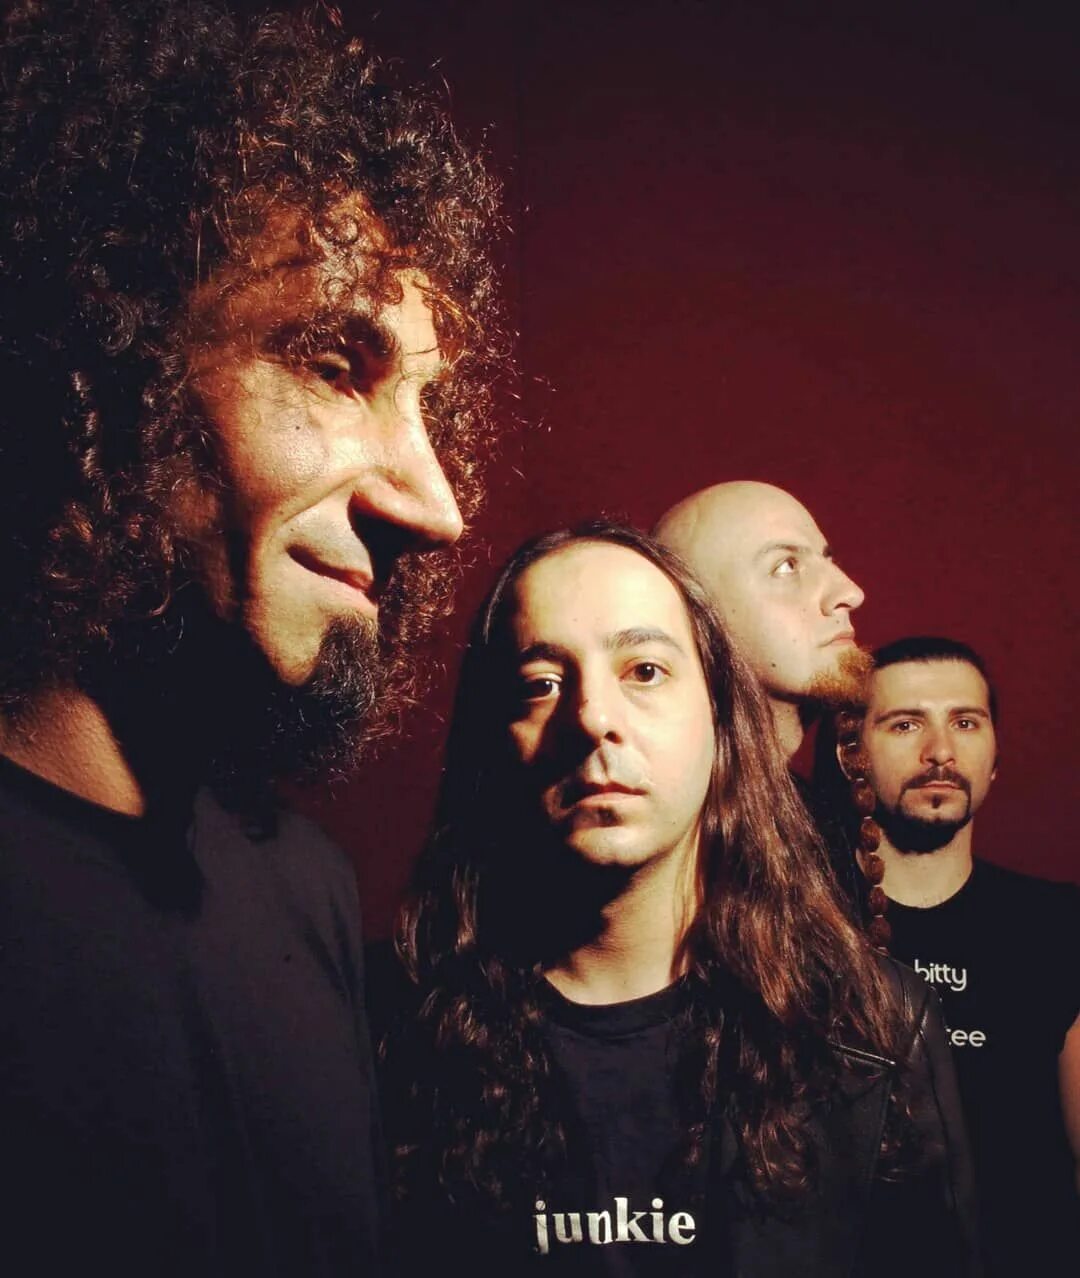 System of a down википедия. SOAD группа. System of a down. SOAD 2005. SOAD участники.